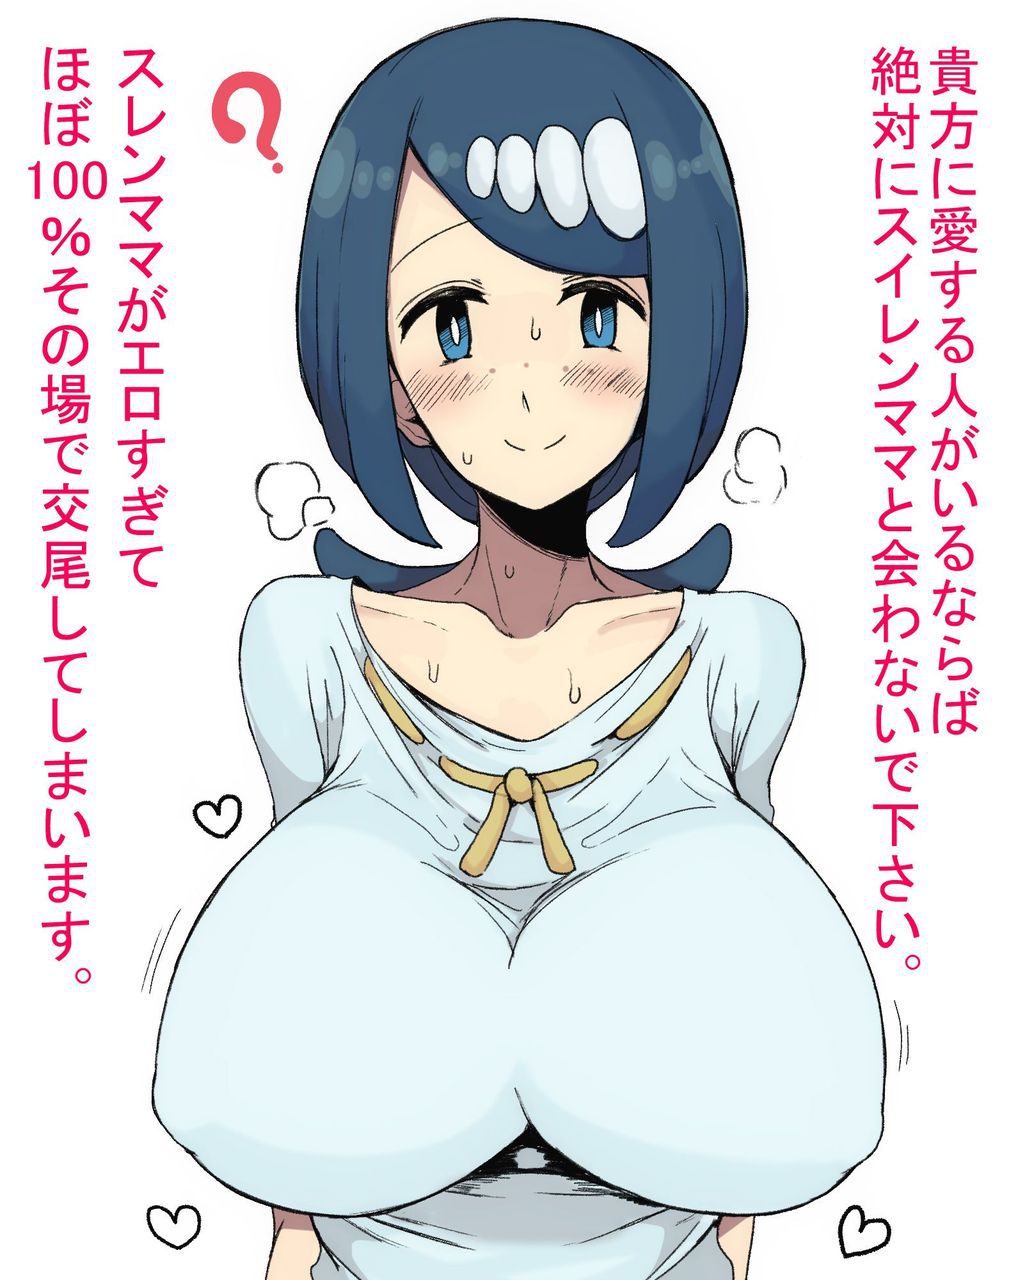 【Pokemon】Paste erotic images of Pokemon girls you want to try Part 8 18